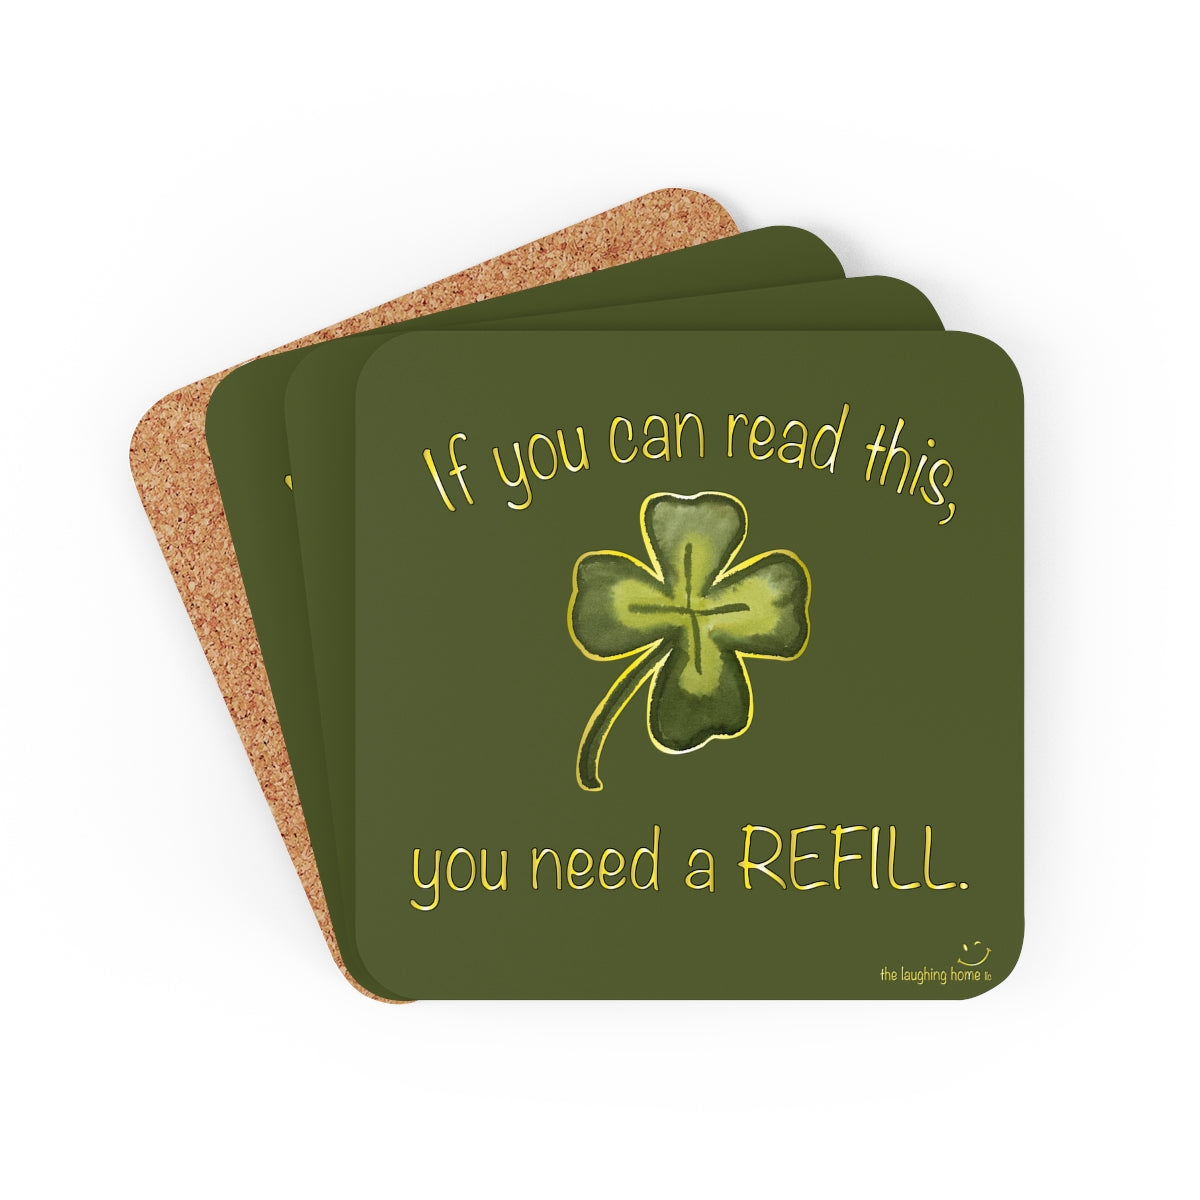 You Need a REFILL Corkwood Coaster Set of 4